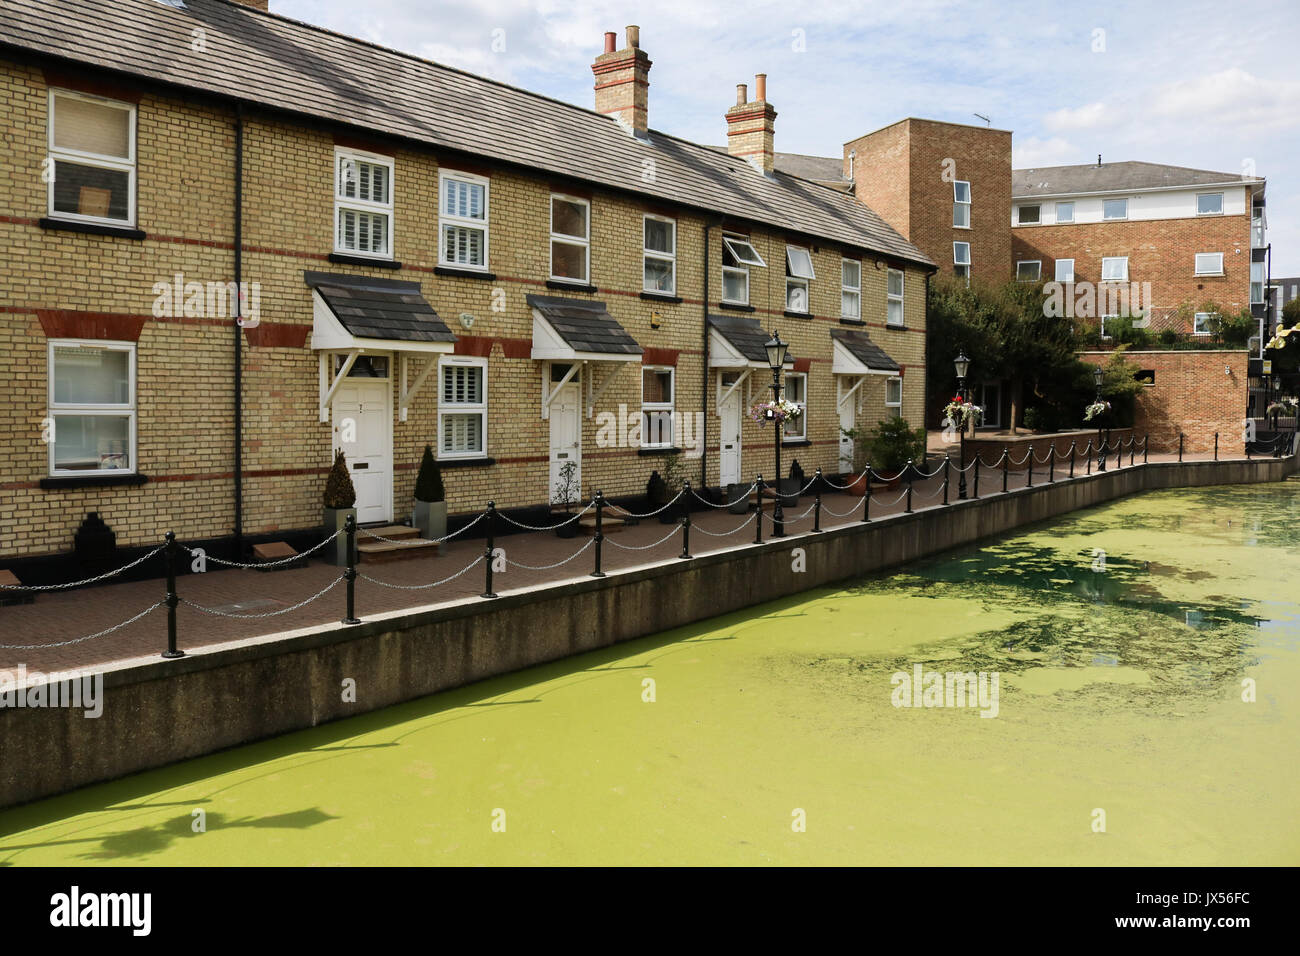 London, UK. 14th Aug, 2017. Residential houses overlooking a canal in Limehouse east London, UK. covered in growing green algae due to the recent hot weather conditions Credit: amer ghazzal/Alamy Live News Stock Photo